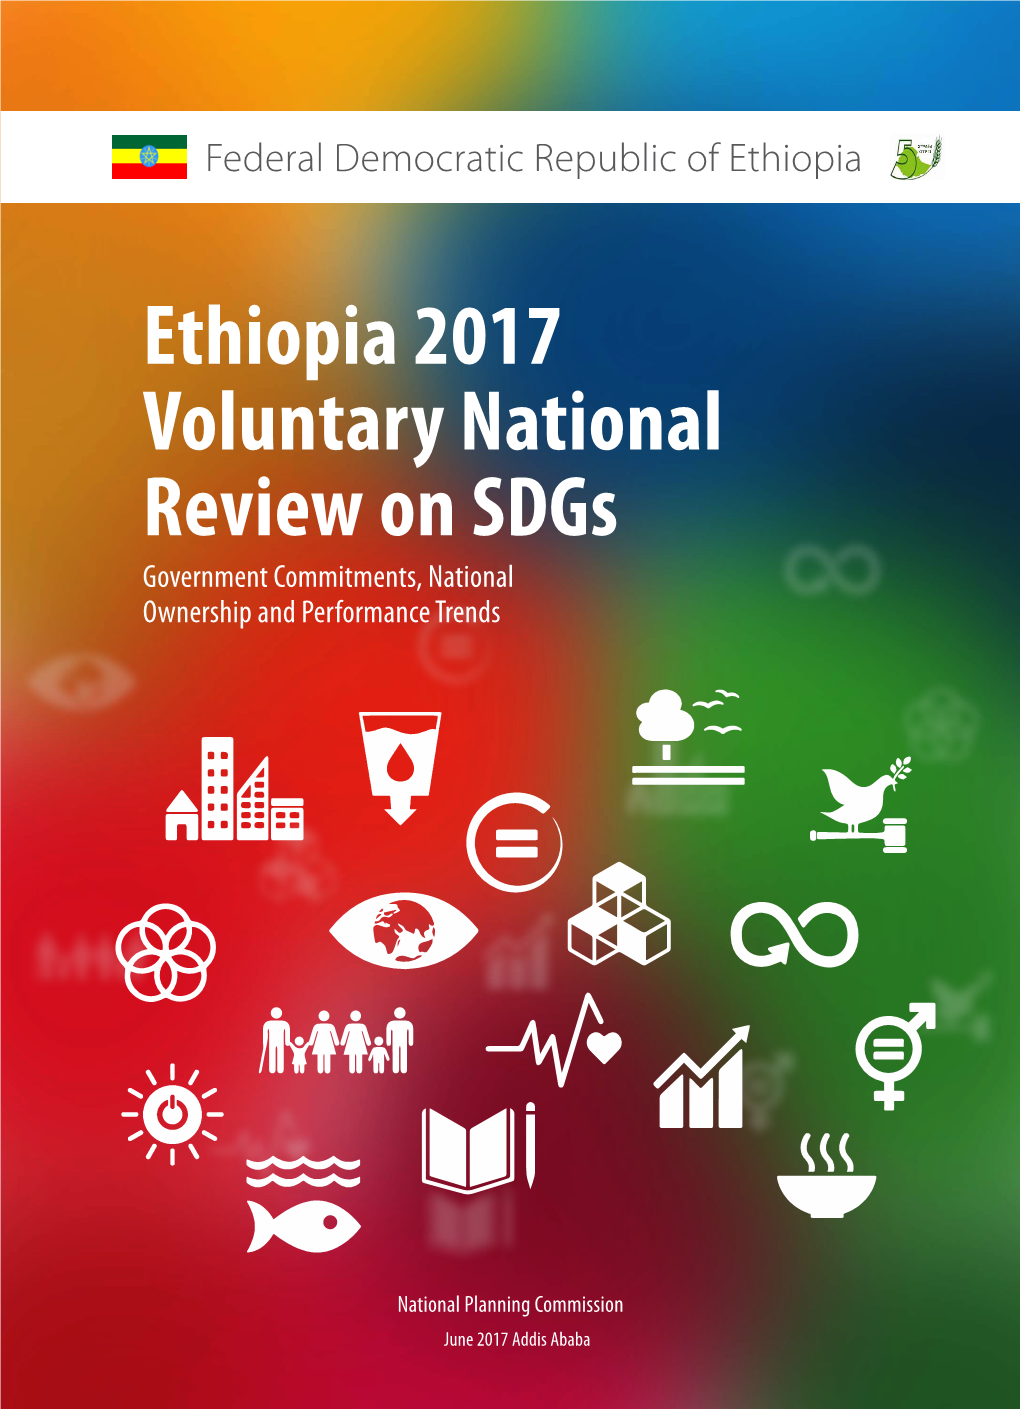 Ethiopia 2017 Voluntary National Review on Sdgs Government Commitments, National Ownership and Performance Trends